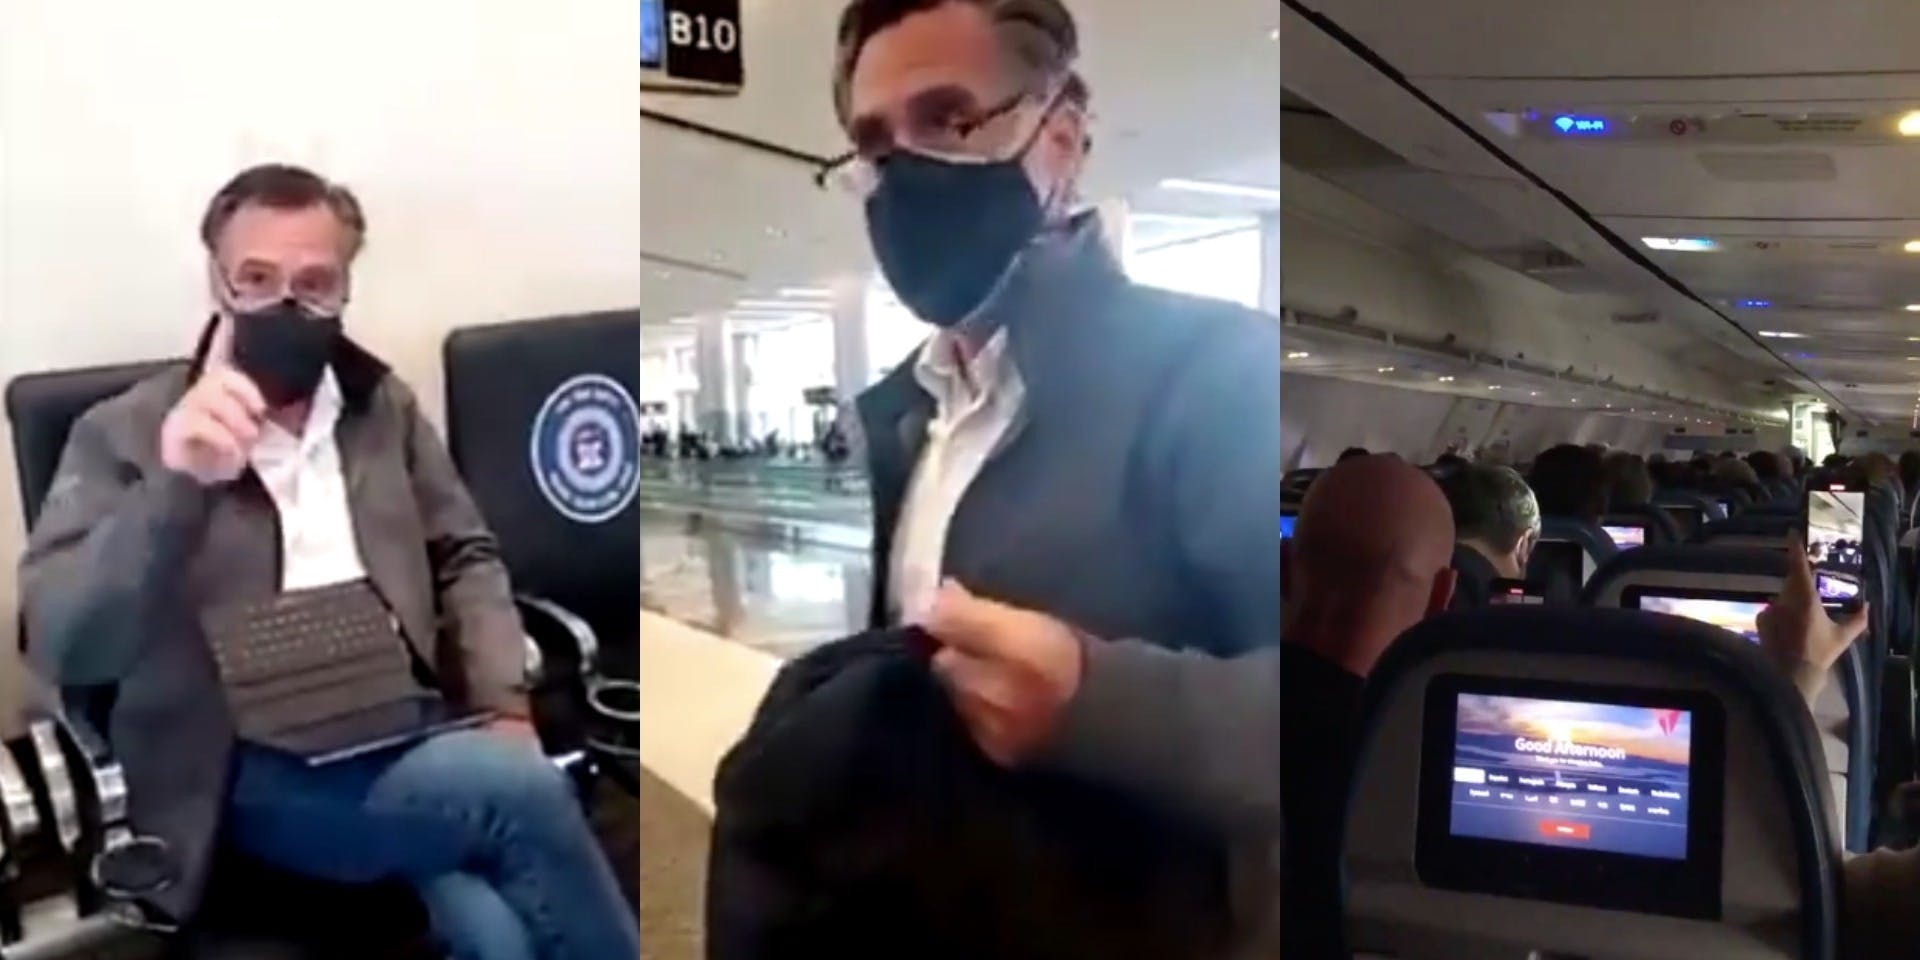 Video shows Trump supporters harassing Mitt Romney on airplane